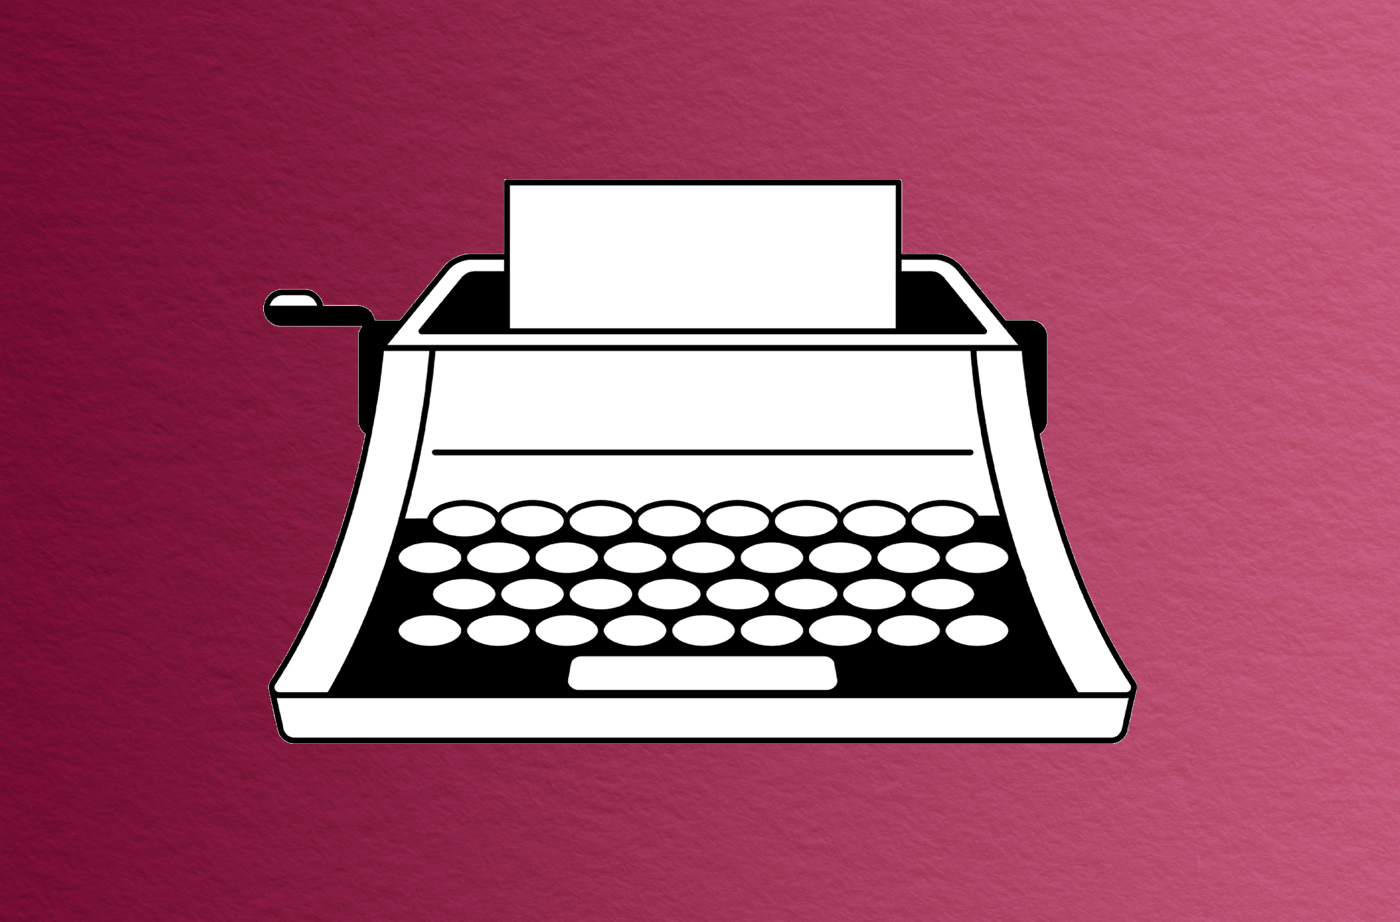 a simple black and white illustration of a typewriter on a wine-red background